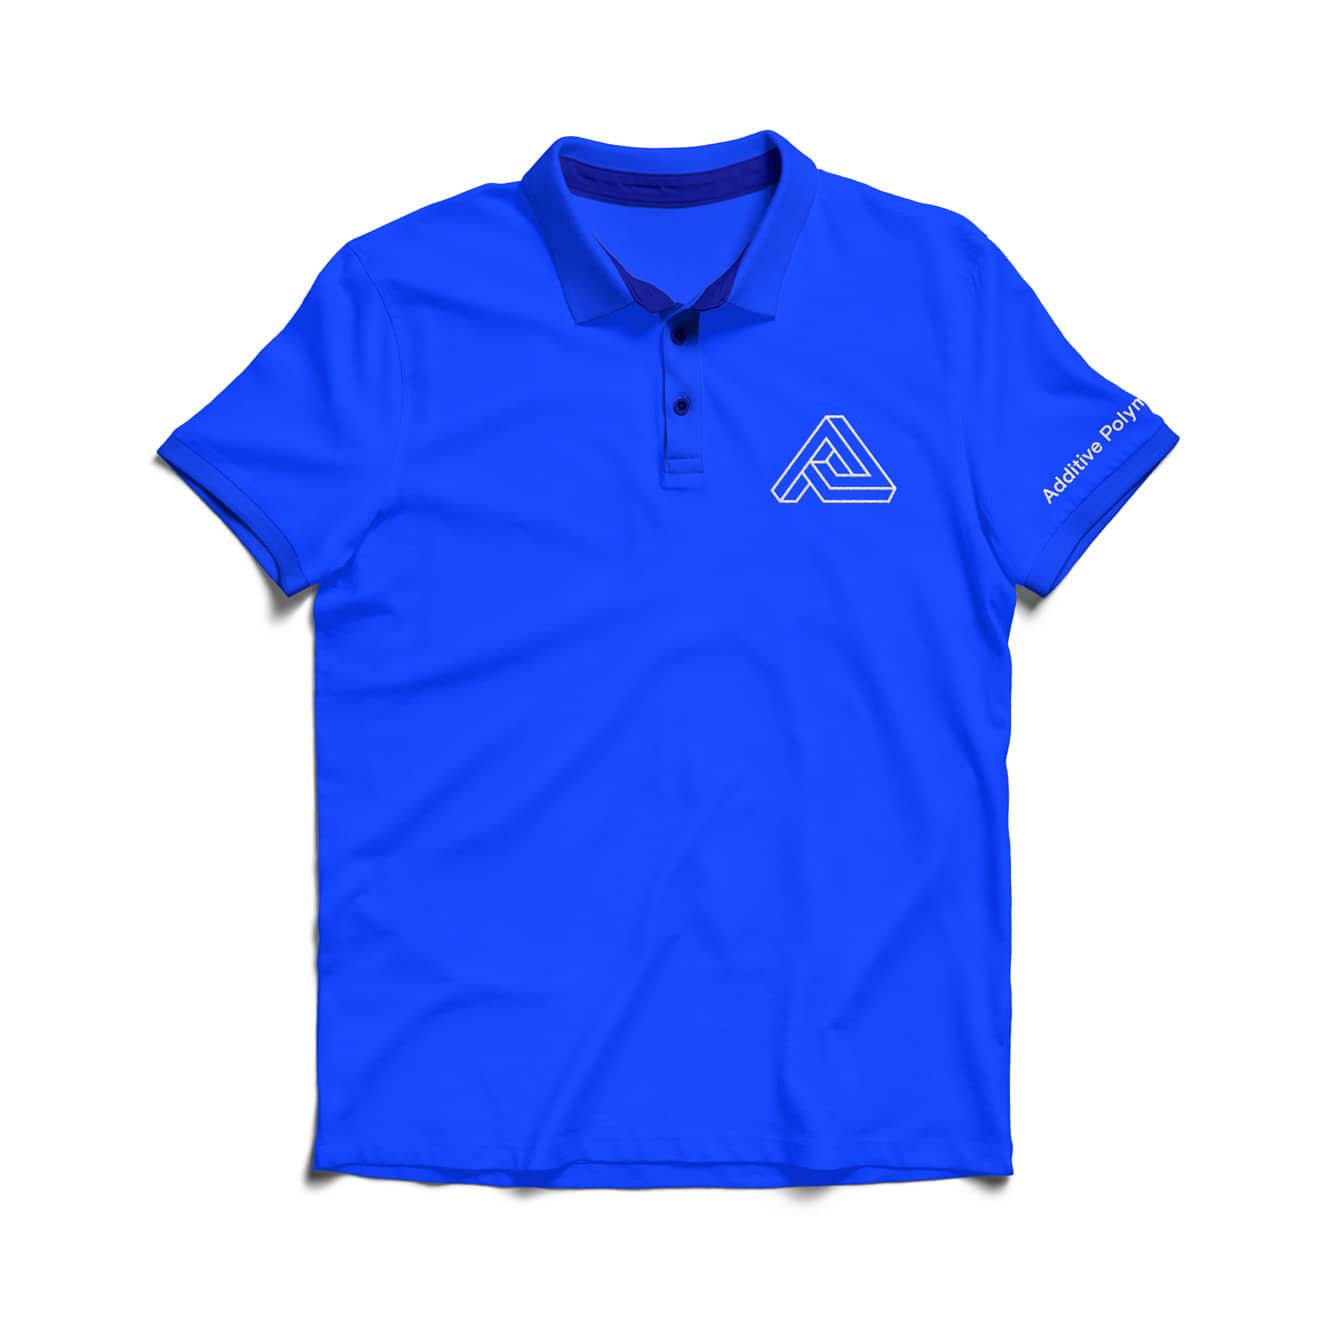 Bright blue polo shirt with a geometric A logo atop the breast